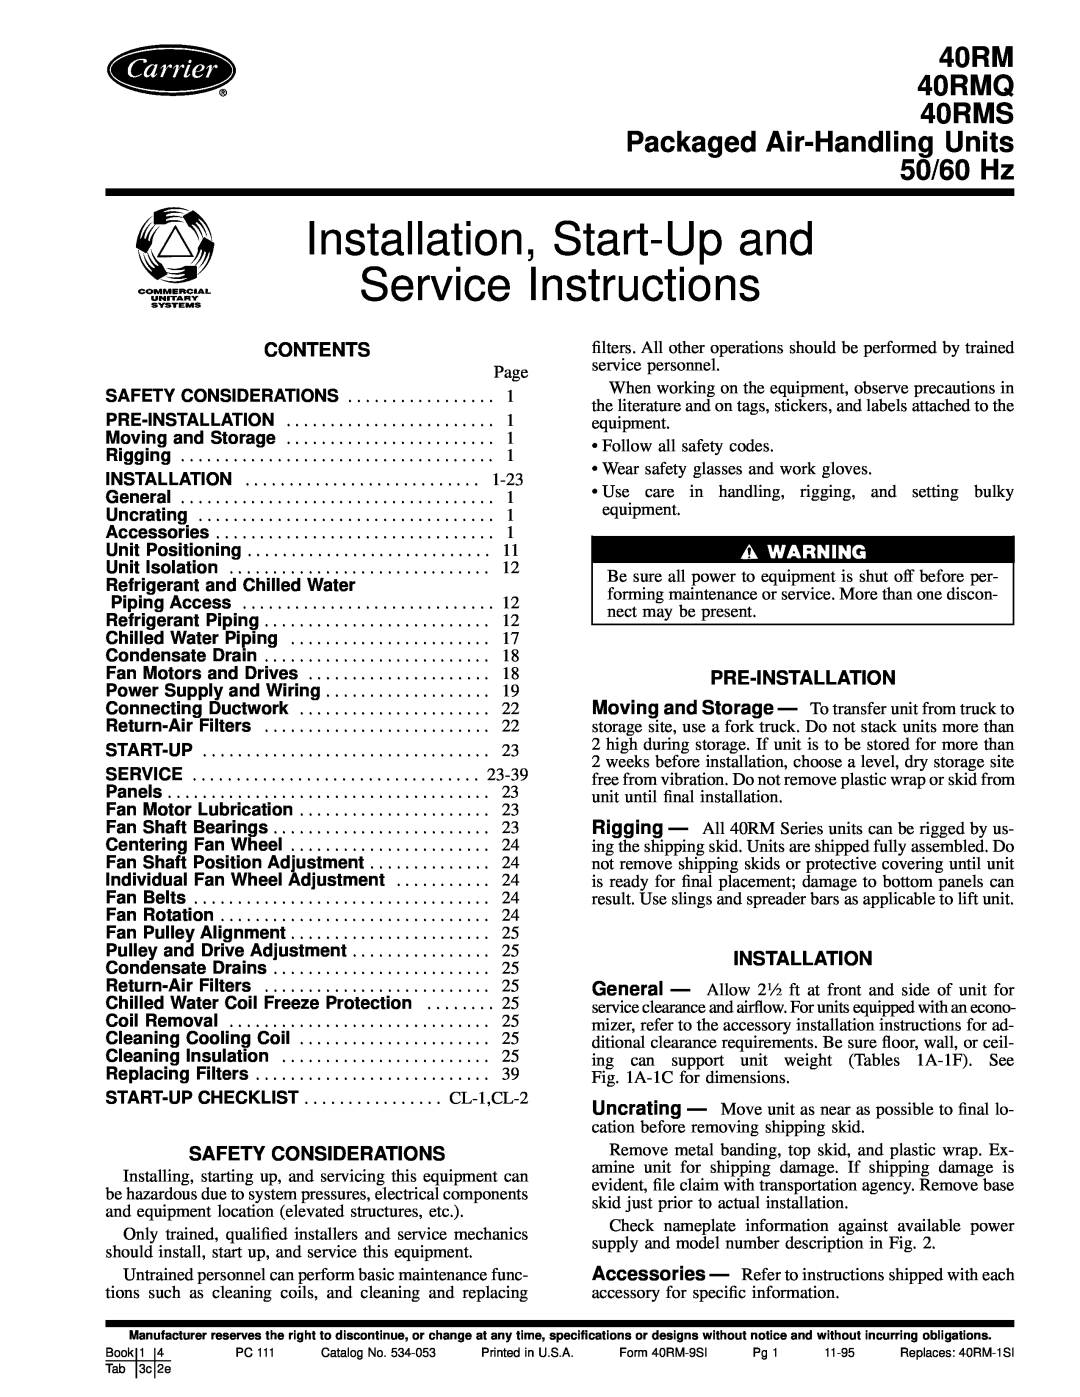 Carrier 40RMS installation instructions Contents, Safety Considerations, Pre-Installation, Refrigerant and Chilled Water 